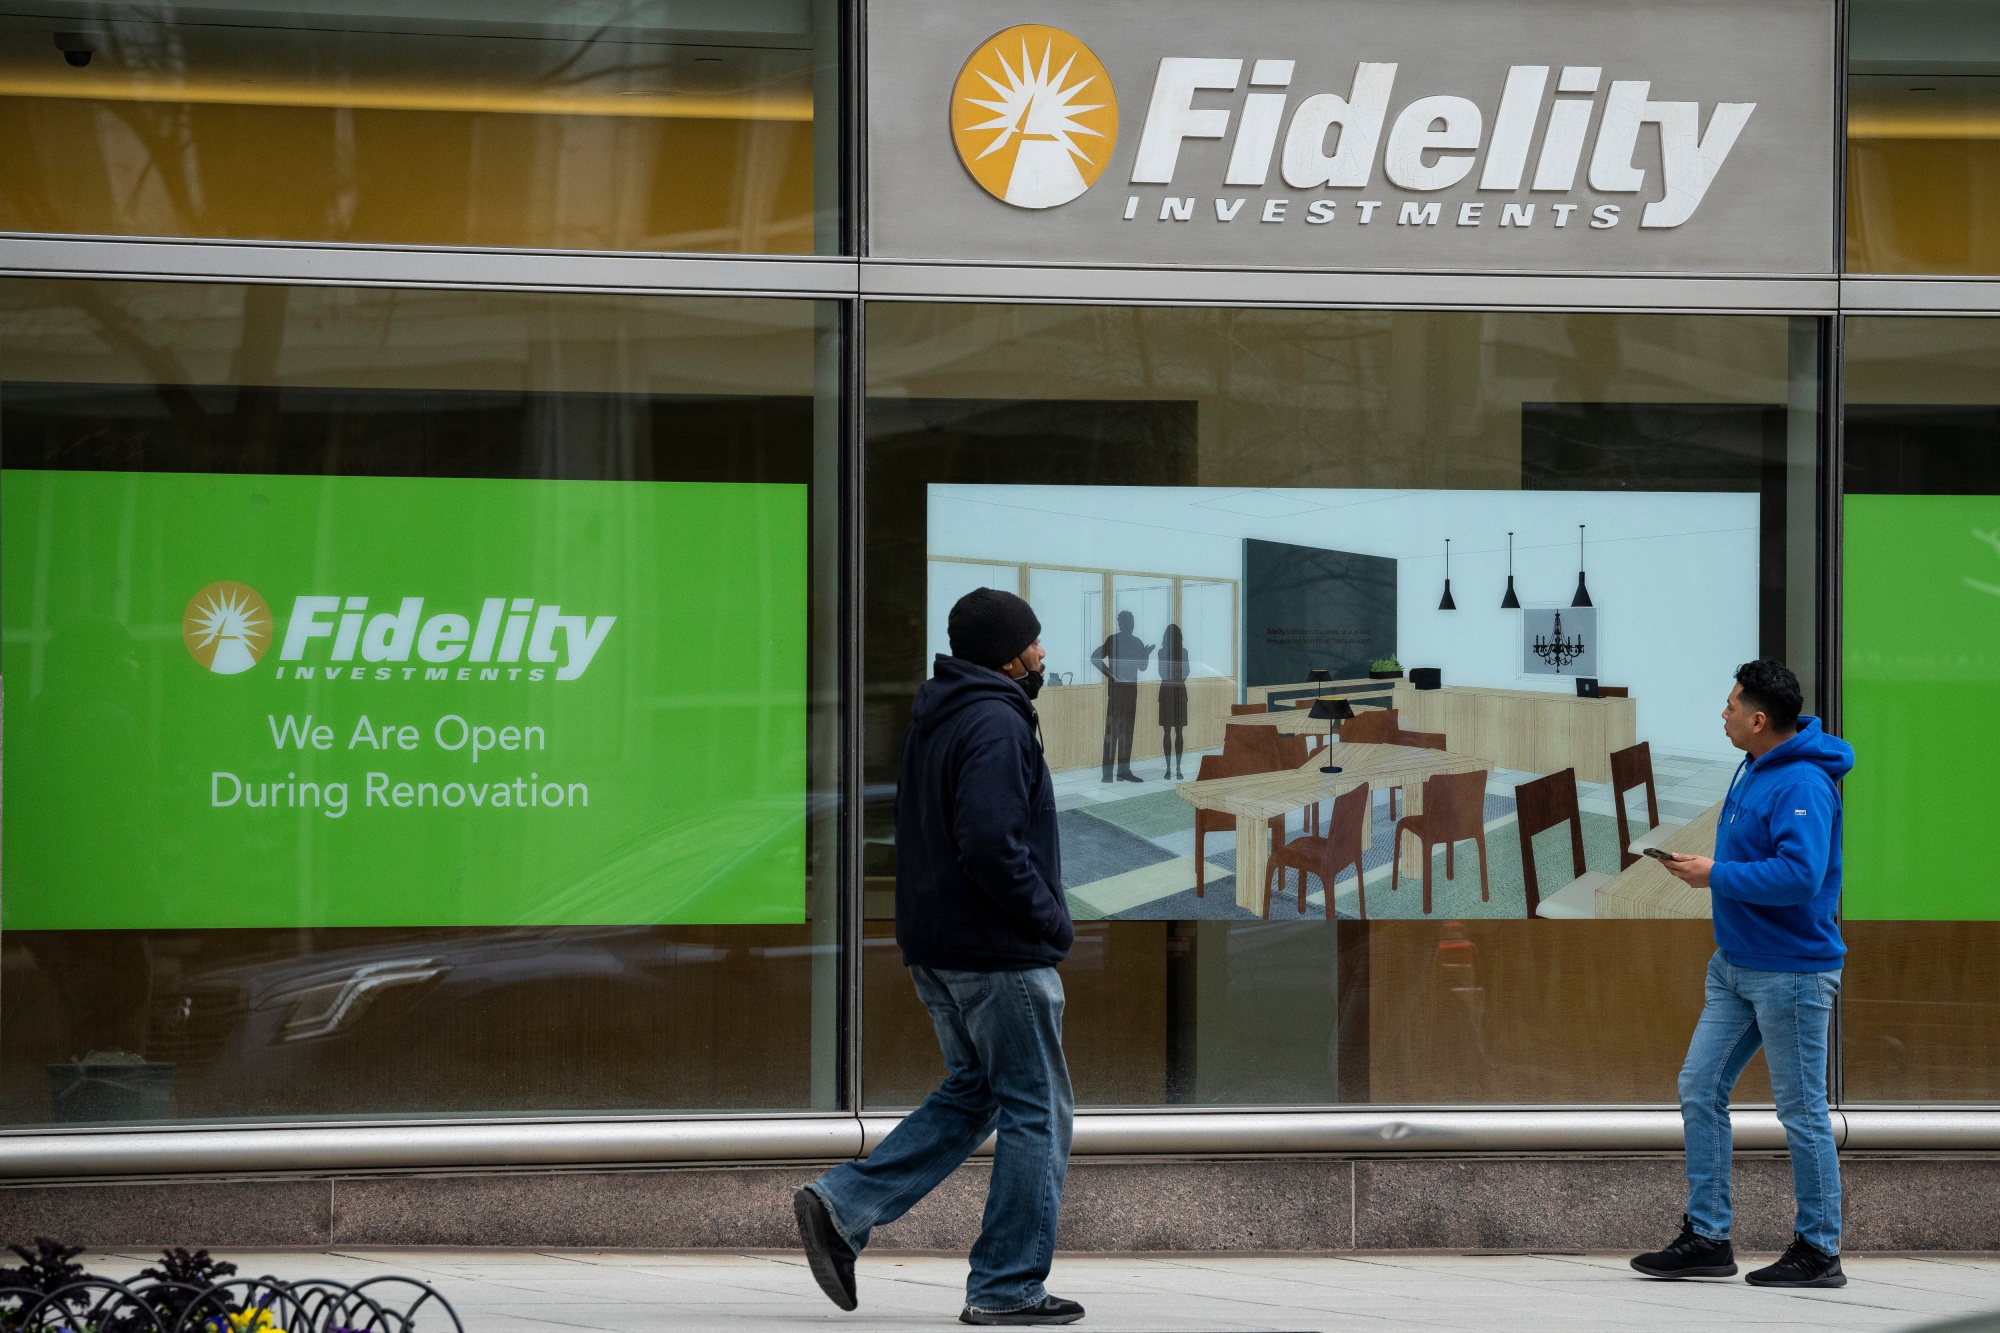 Fidelity Investments recently shuffled management&nbsp;and cut 700 jobs in the US, now Fidelity International in London is coming in for a similar treatment